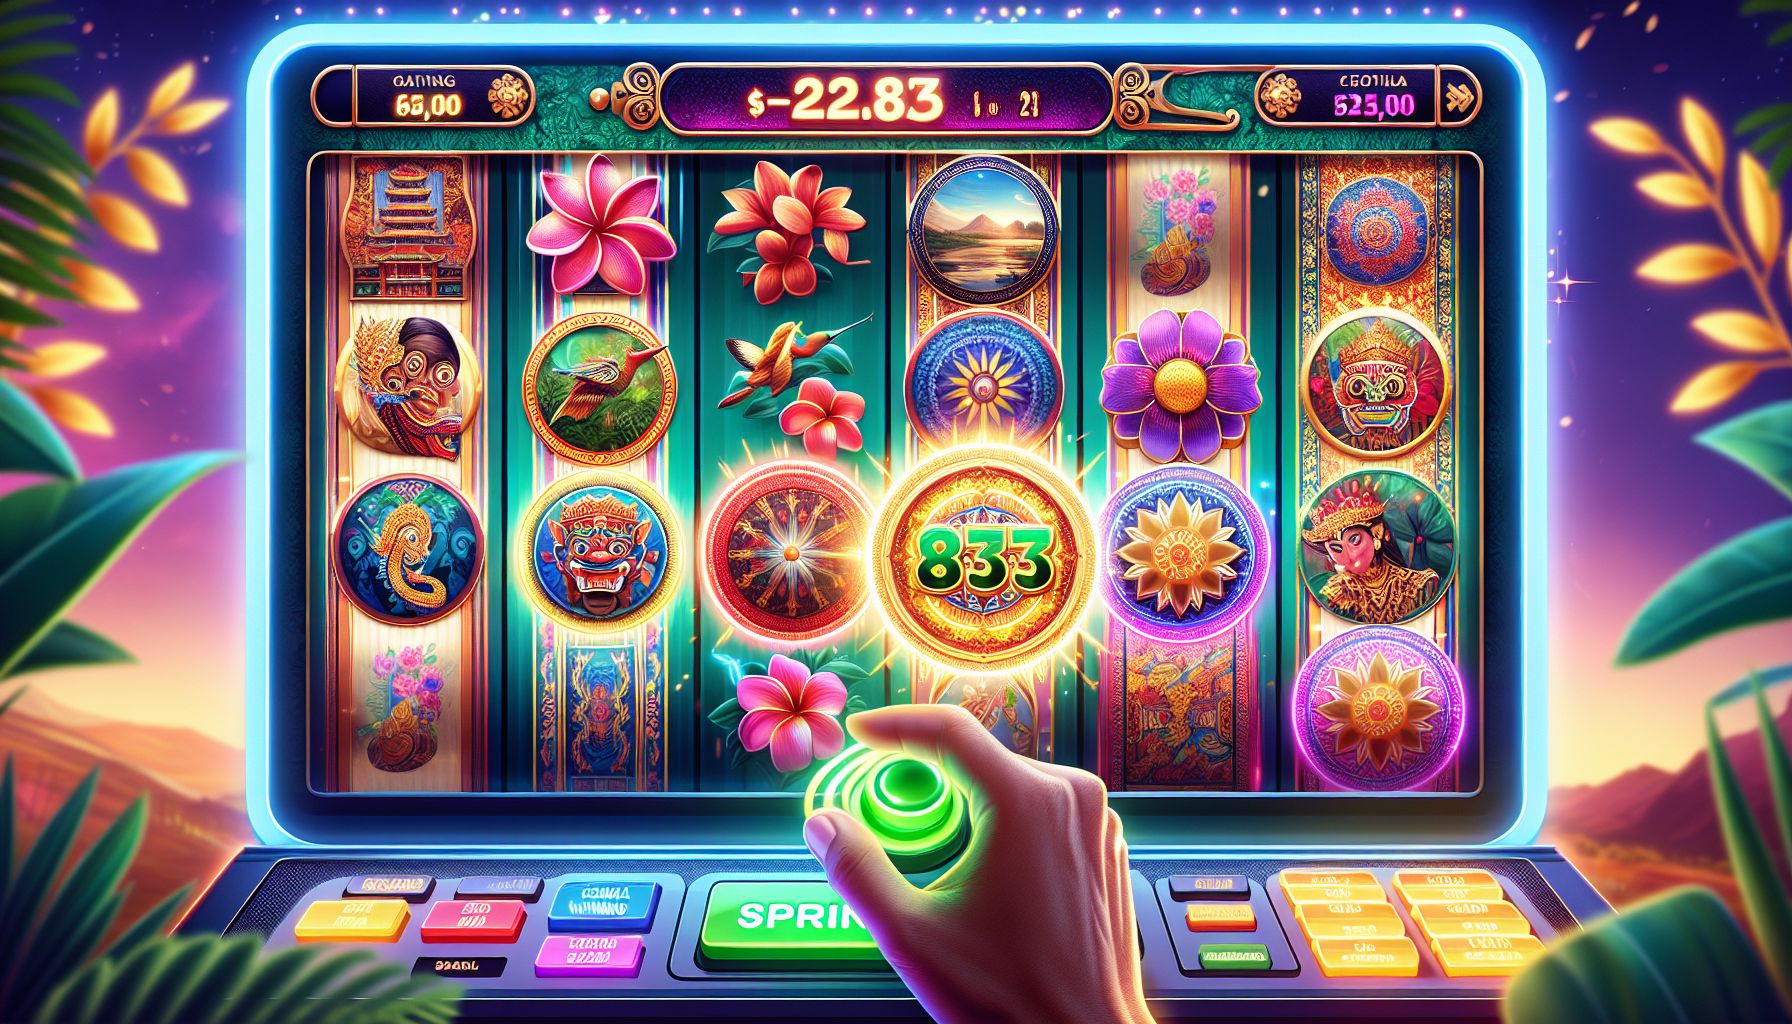 Slot Online in Indonesia: A Thrilling Game to Try